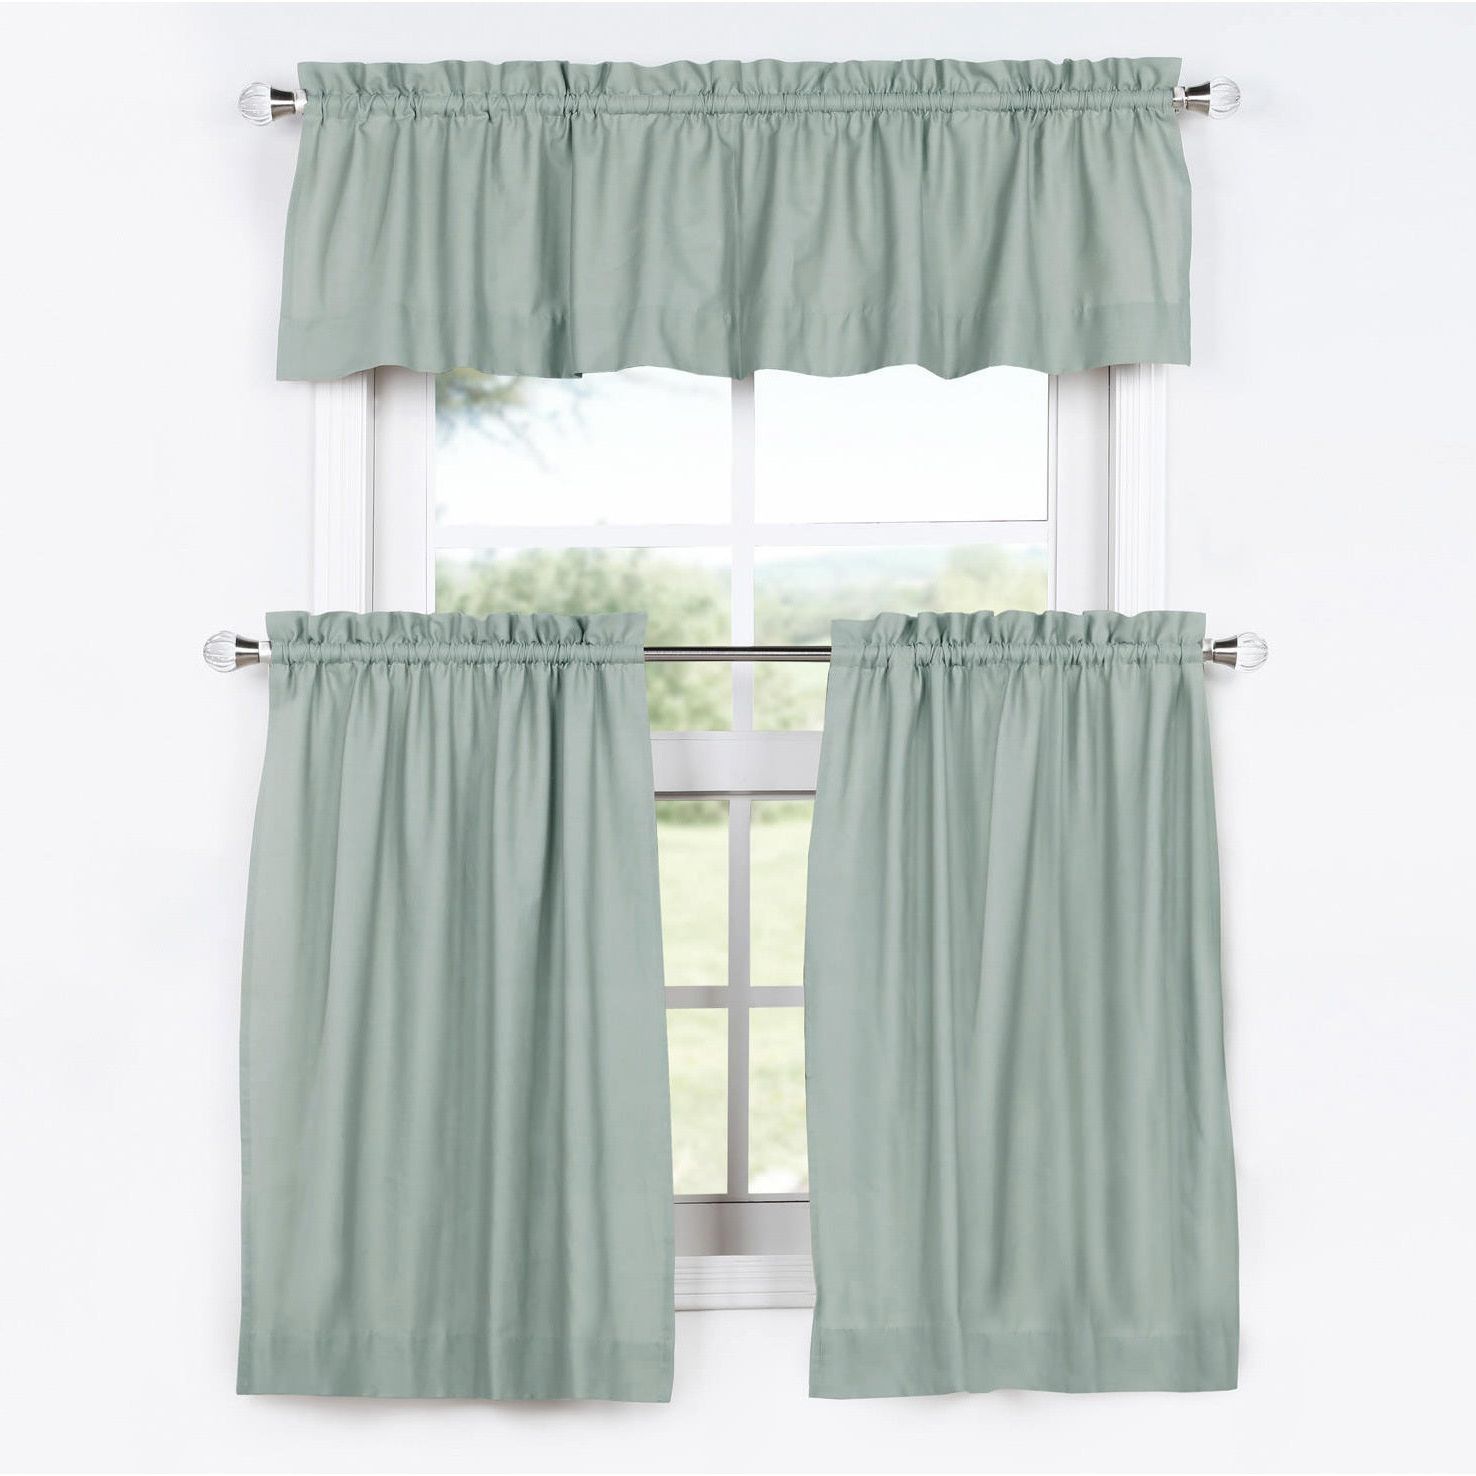 Exclusive Fabrics Solid Cotton Kitchen Tier Curtain & Valance Set (3pc) For 2020 Bermuda Ruffle Kitchen Curtain Tier Sets (View 9 of 20)